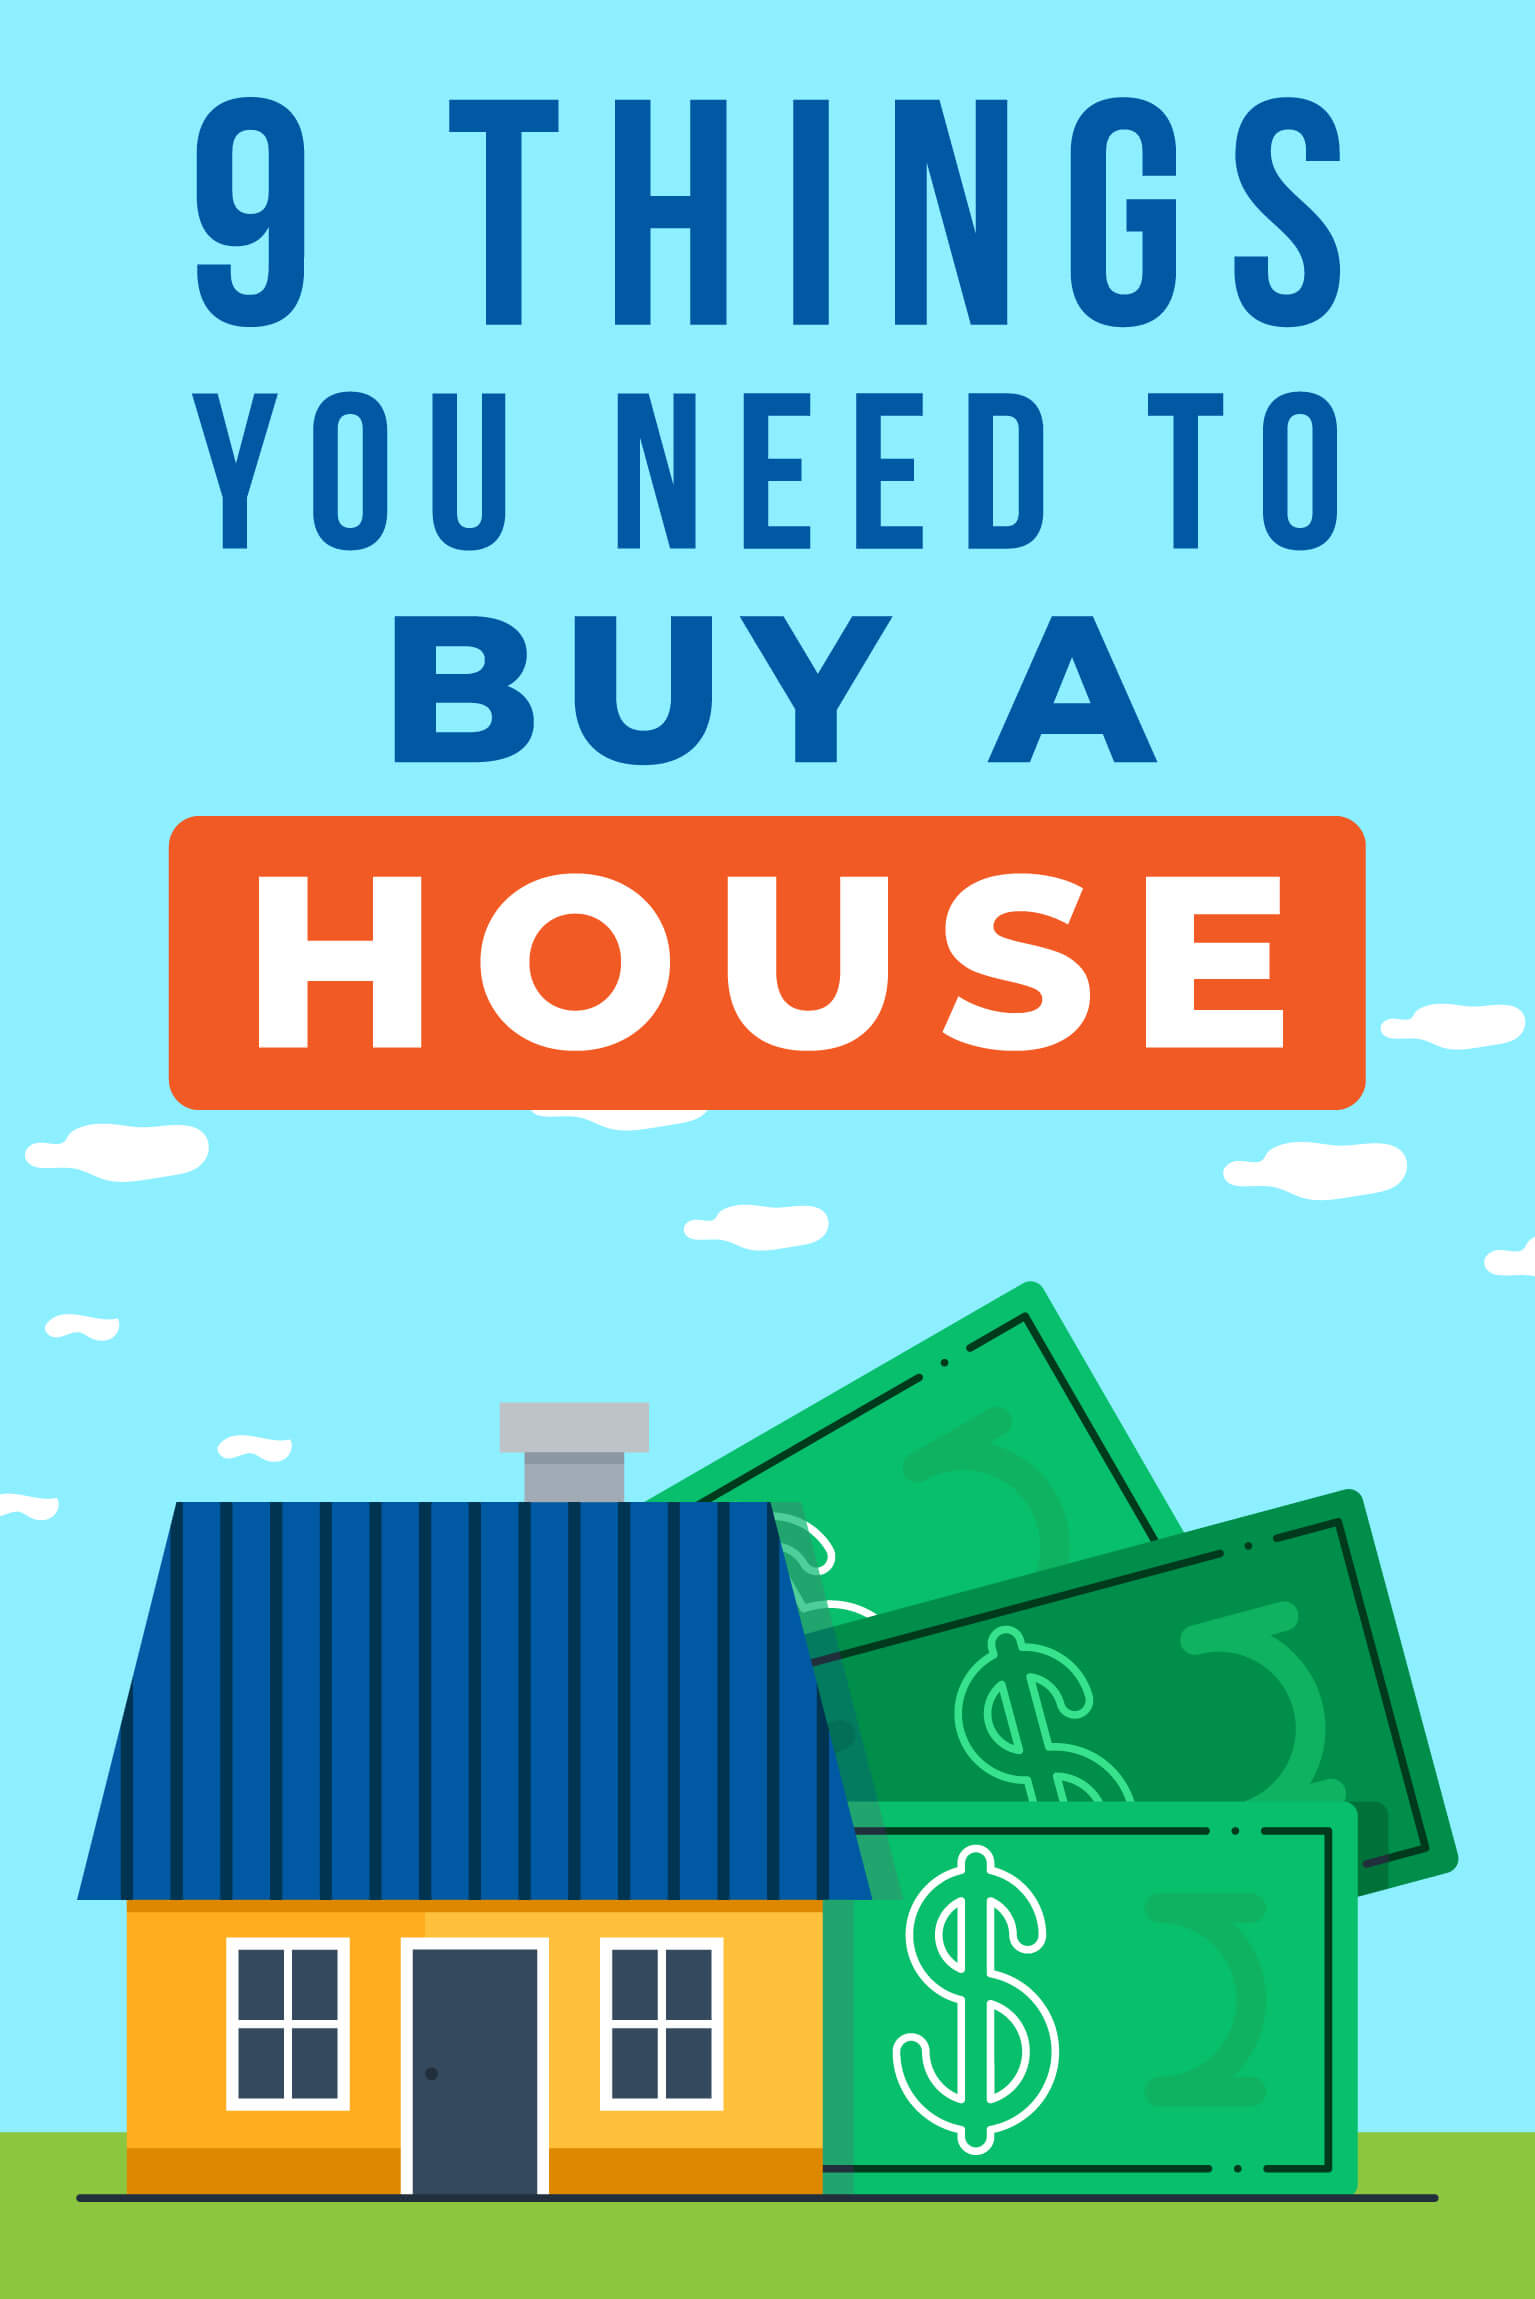 9 Things You Need to Buy a House